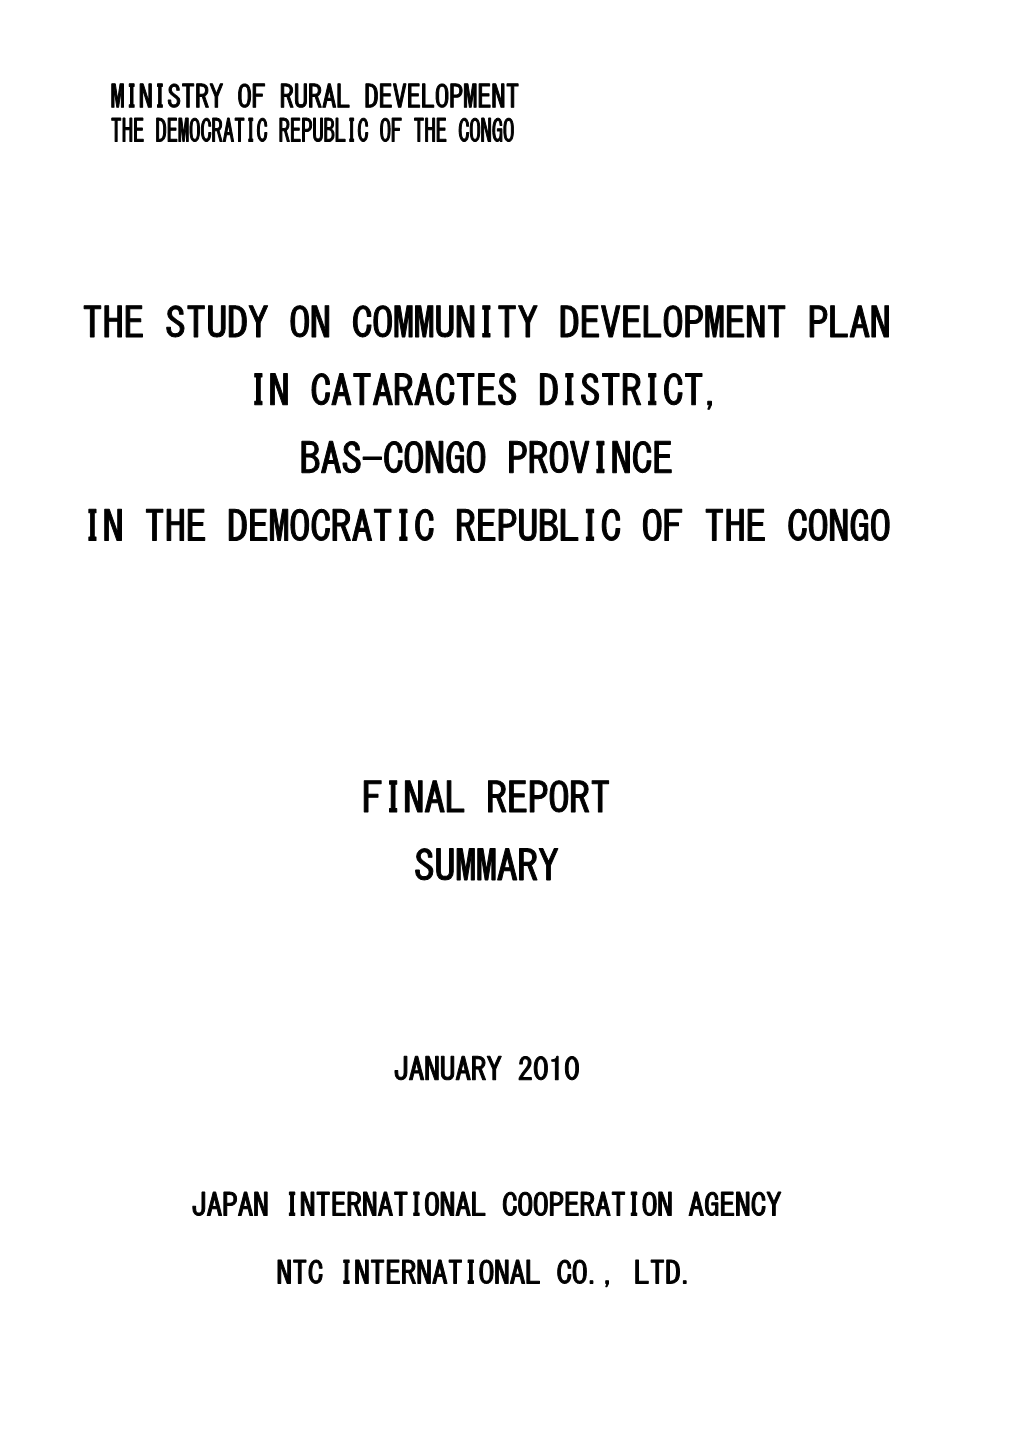 The Study on Community Development Plan in Cataractes District, Bas-Congo Province in the Democratic Republic of the Congo